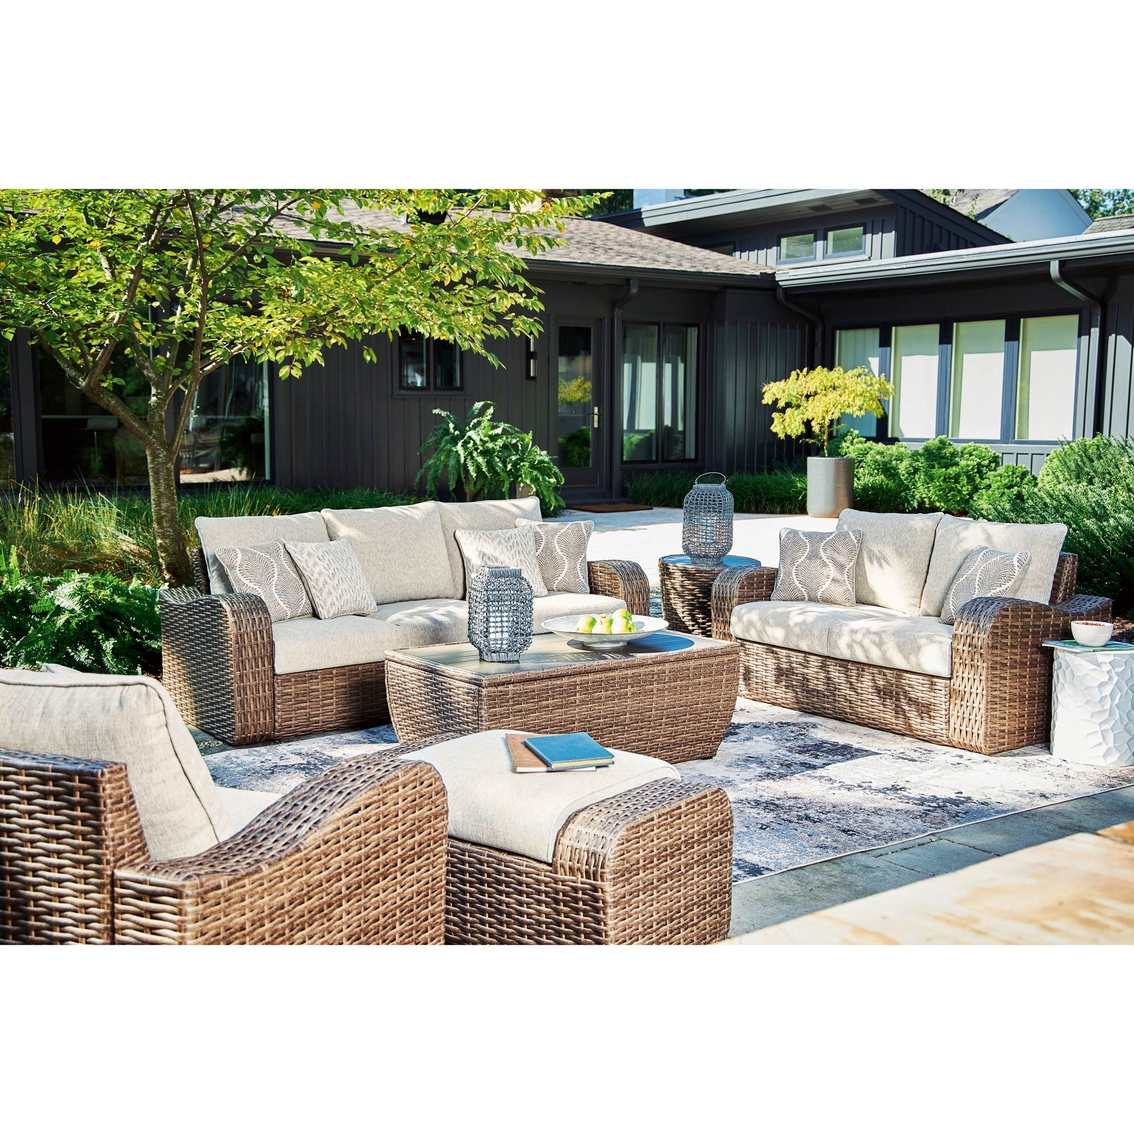 Signature Design by Ashley Sandy Bloom Outdoor Loveseat with Cushion - Image 6 of 6